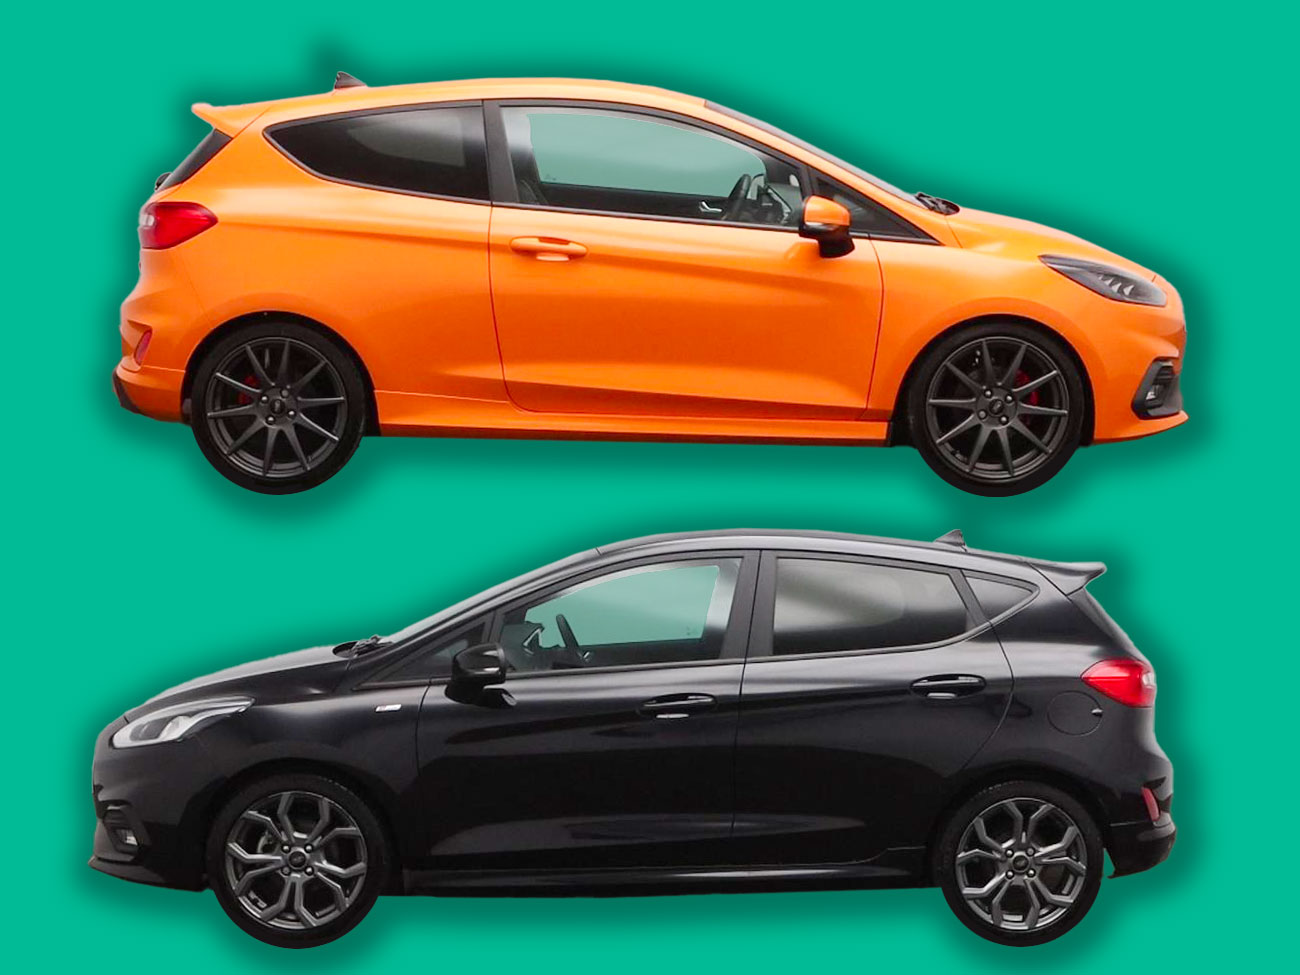 Ford Fiesta graphic